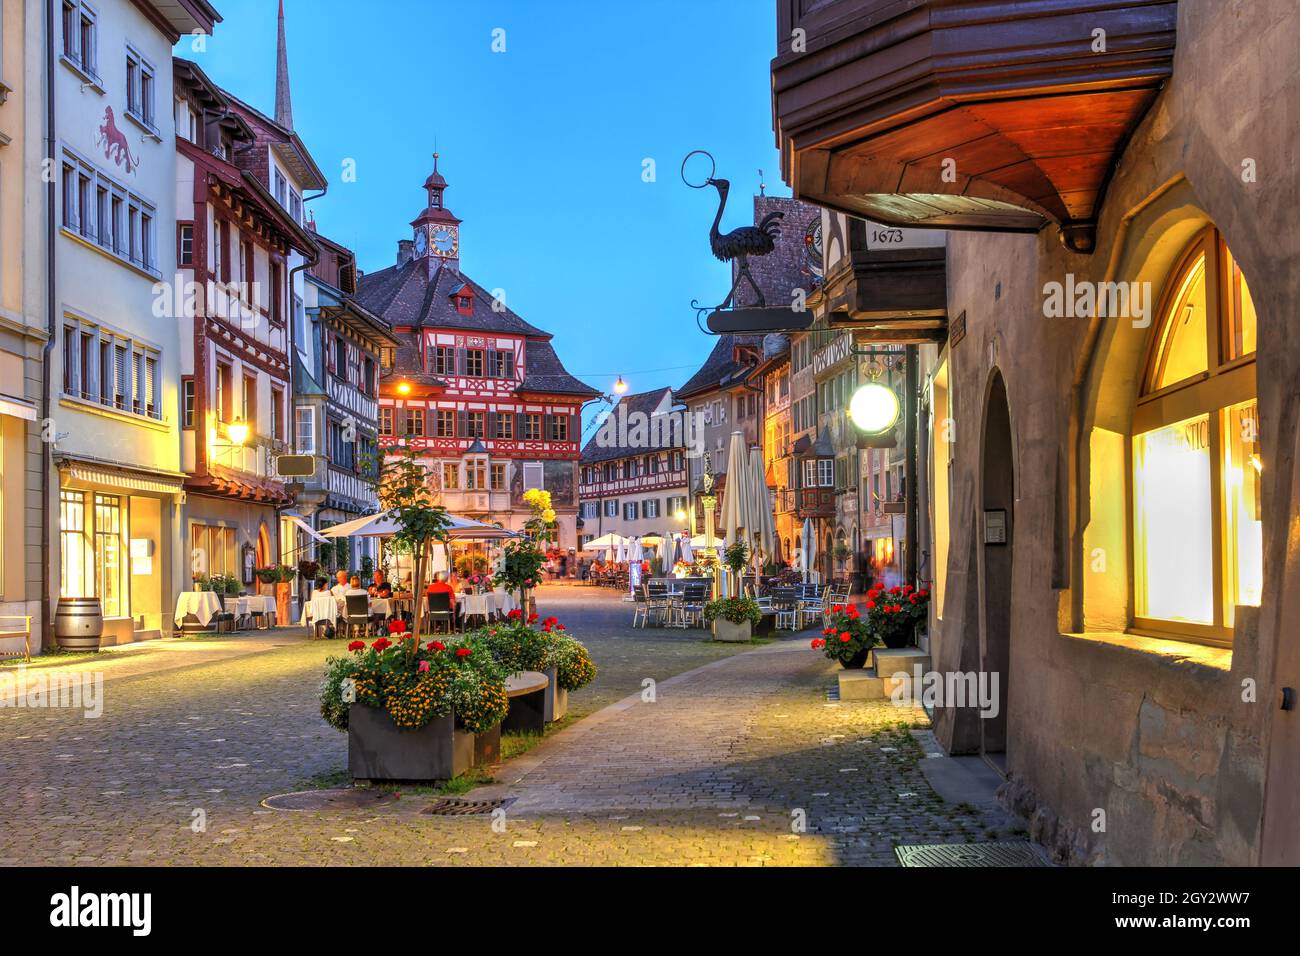 Summer evening in Stein am Rhein along the Rathausplatz, with the Town Hall at the far end. Stein am Rhein is a historic town west of Lake Constance ( Stock Photo